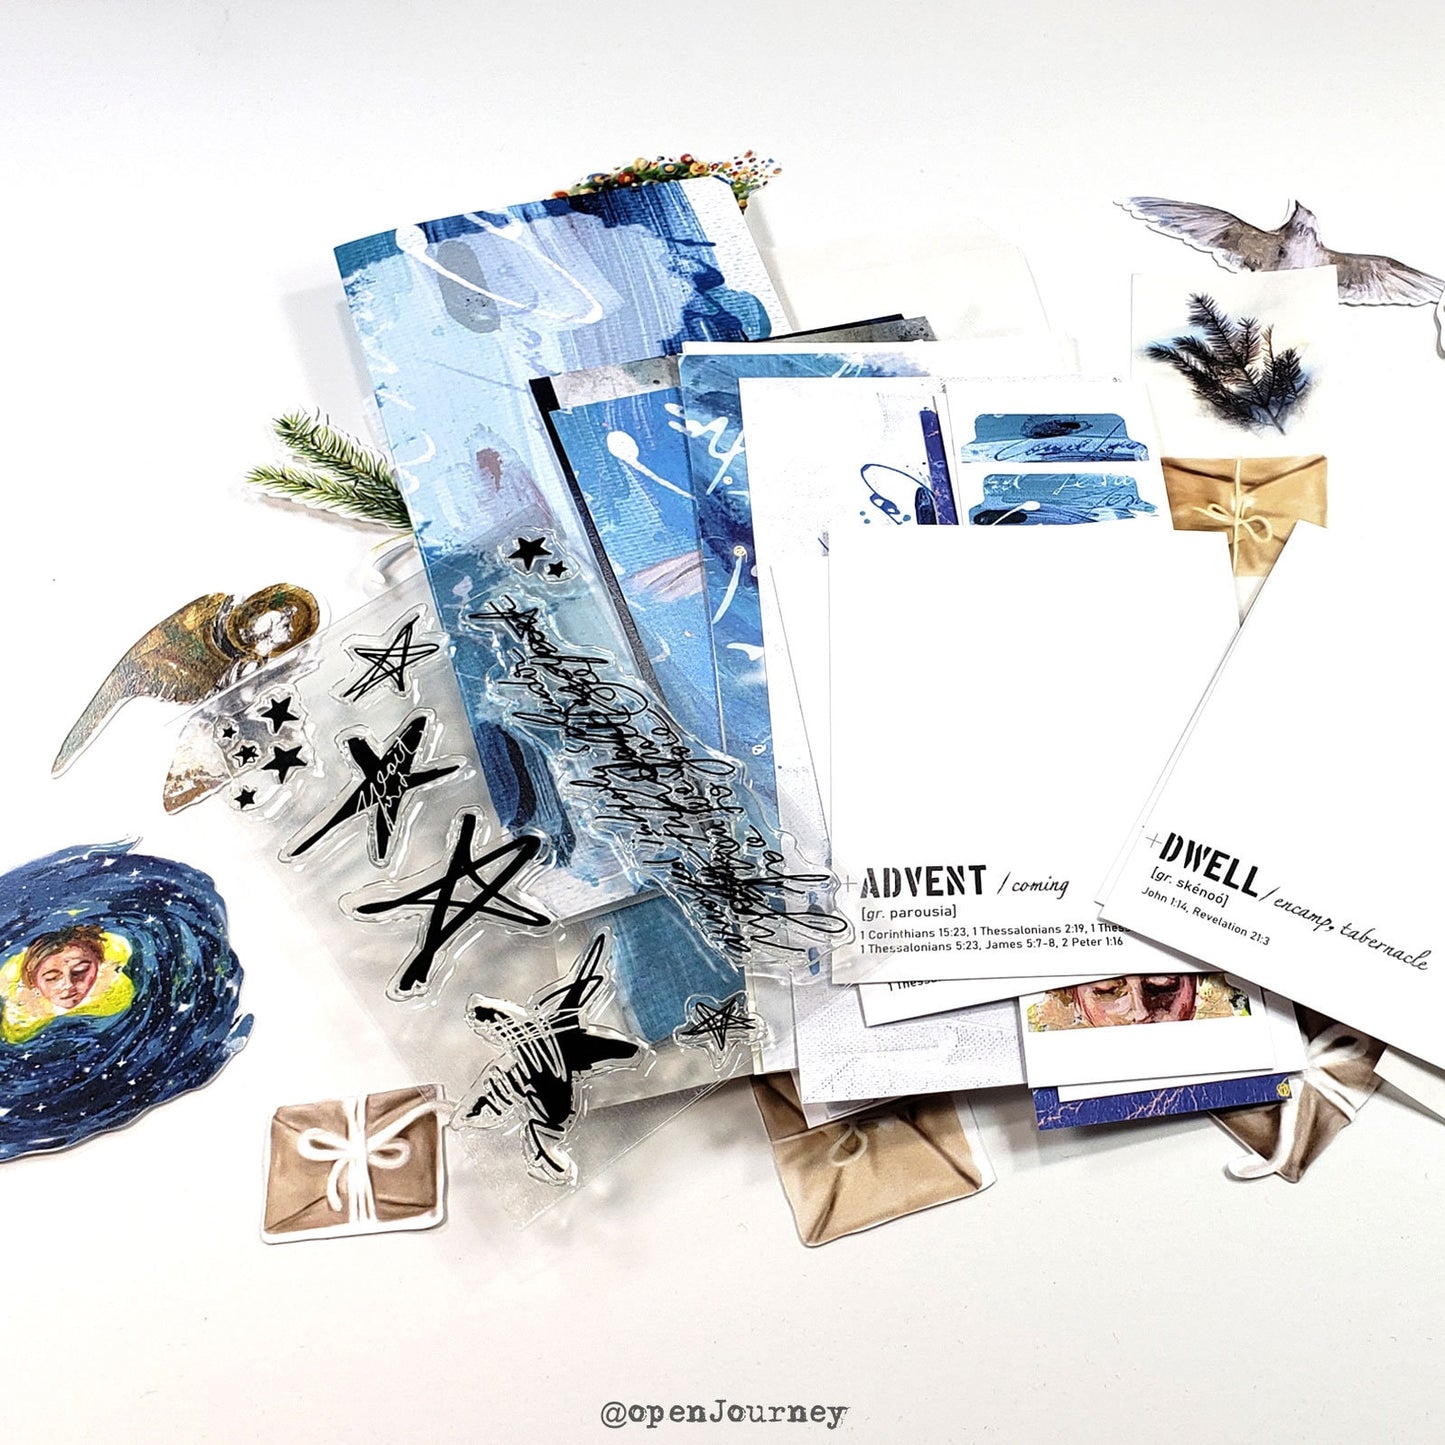 Wait for the Lord- an Advent creative bible study / Bible journaling creative devotional kit